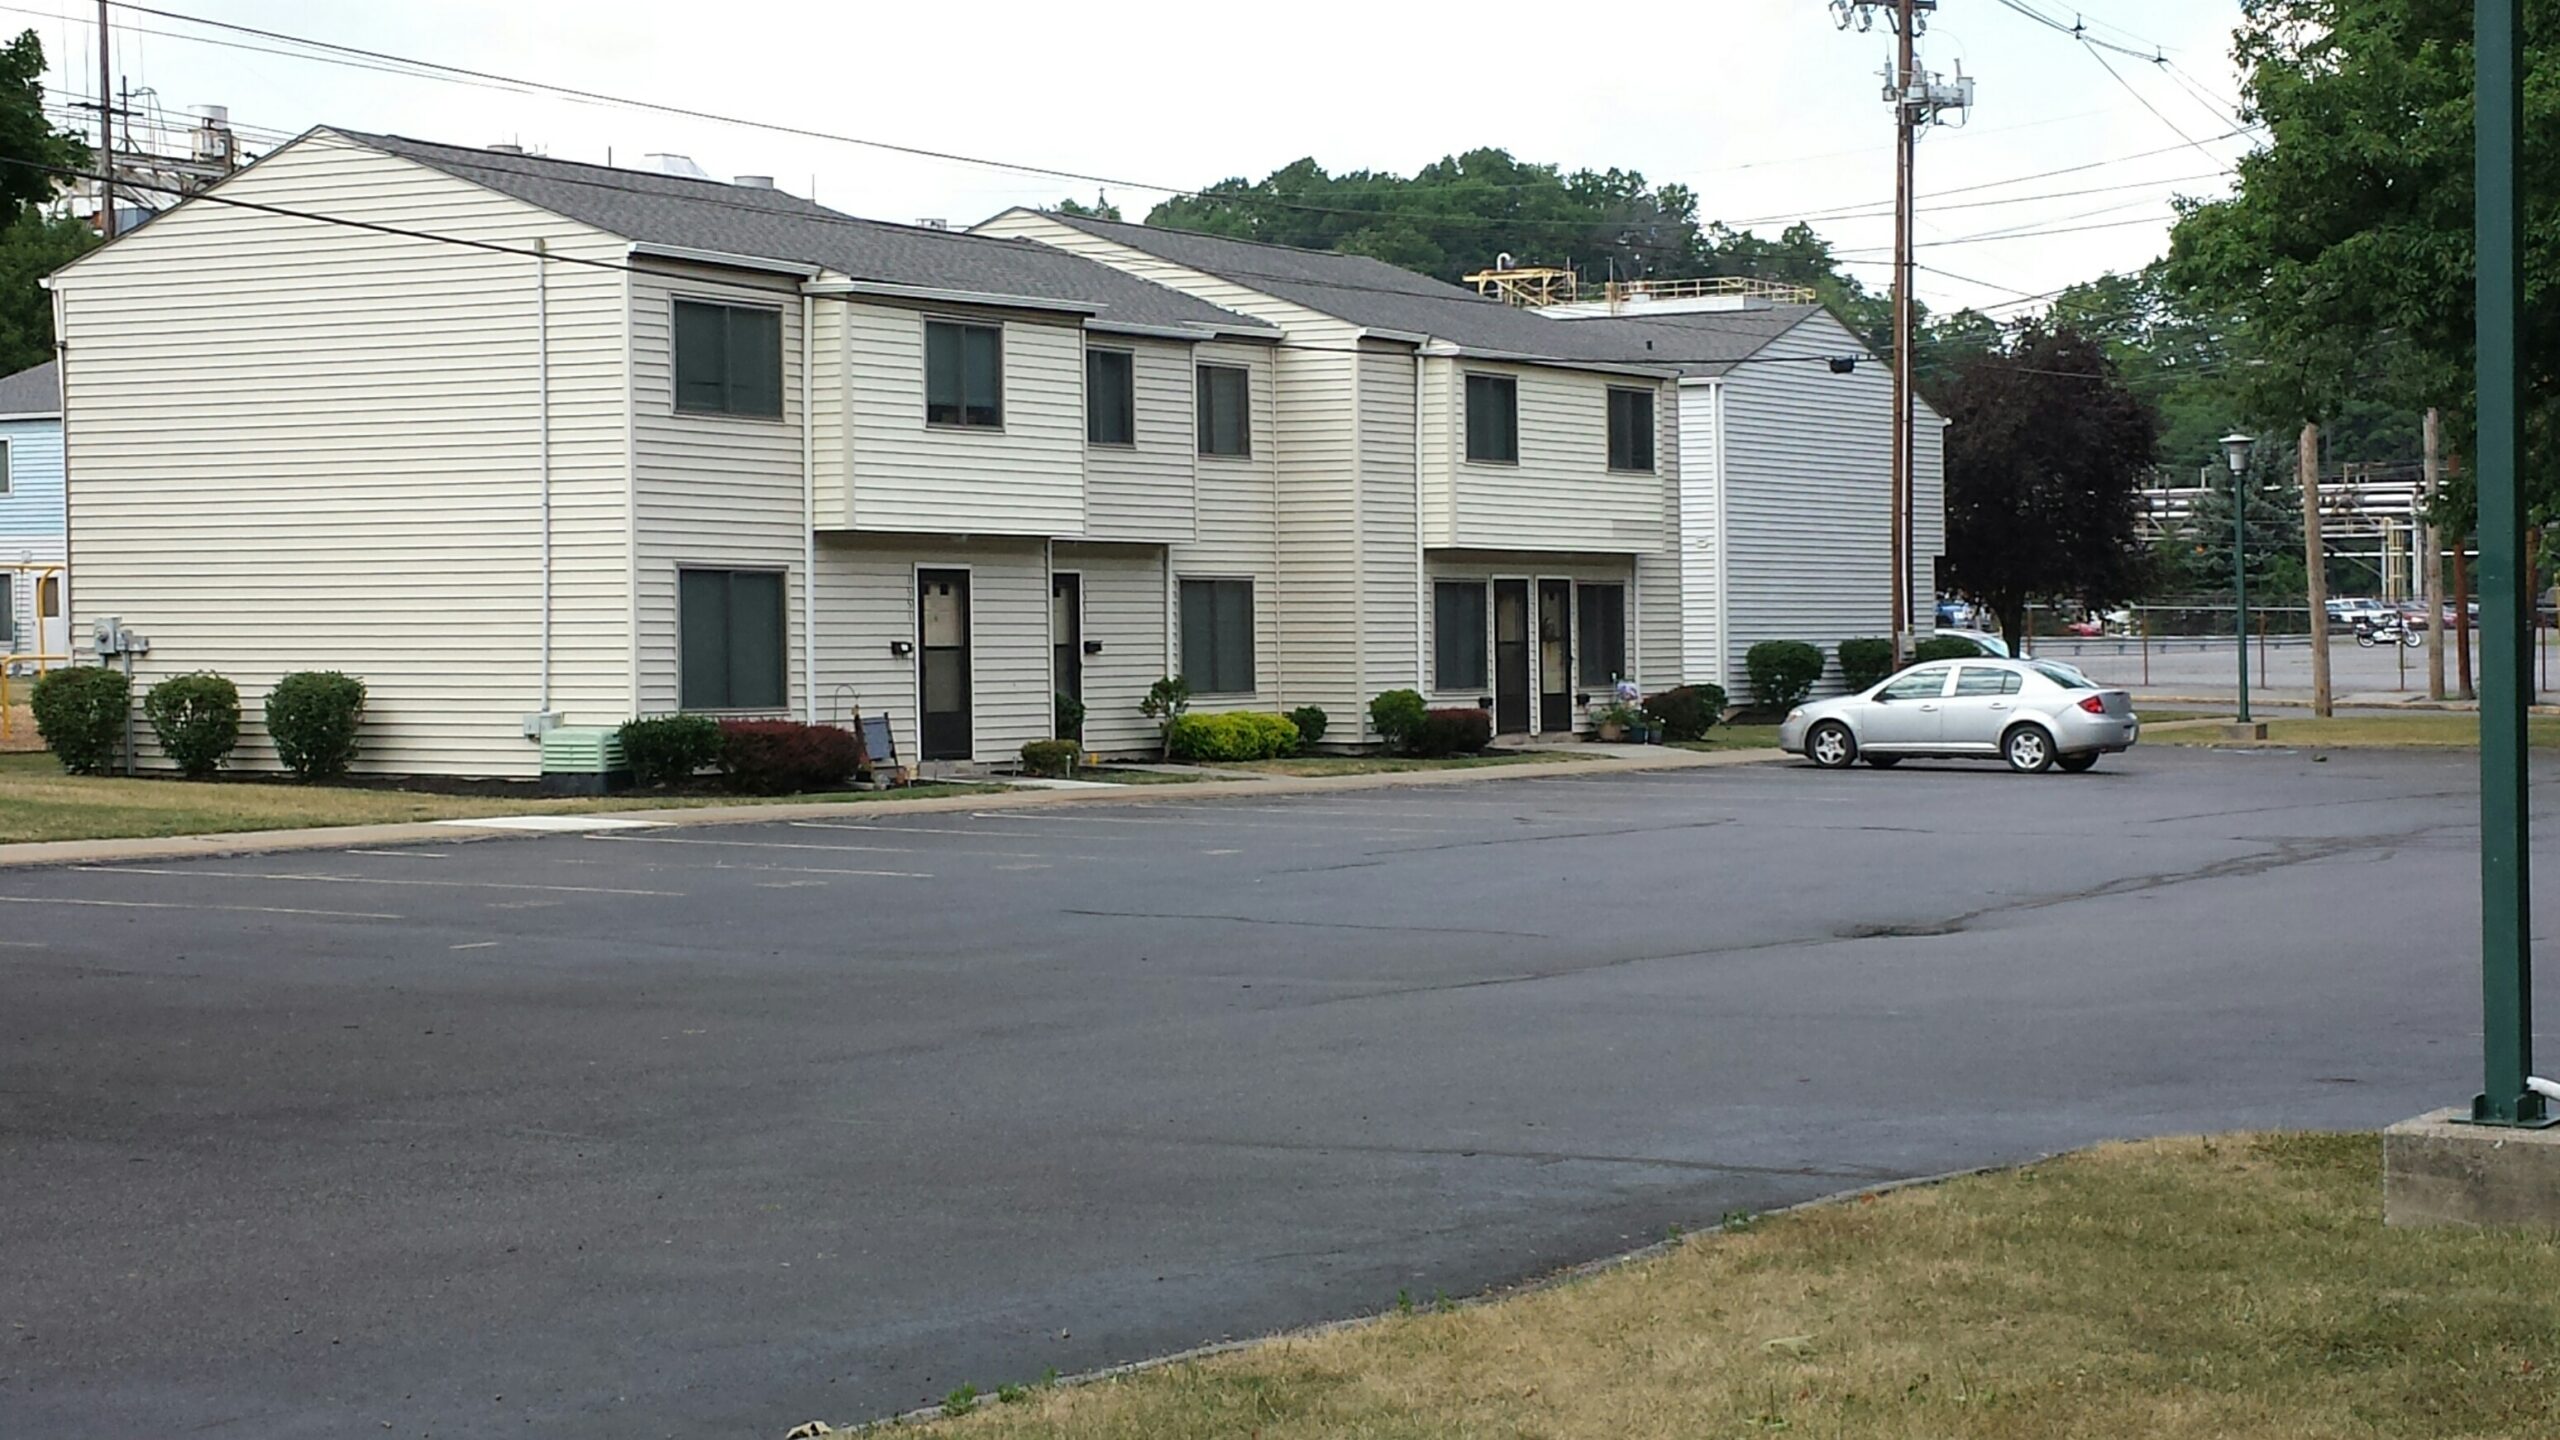 TYRONE TOWNHOMES